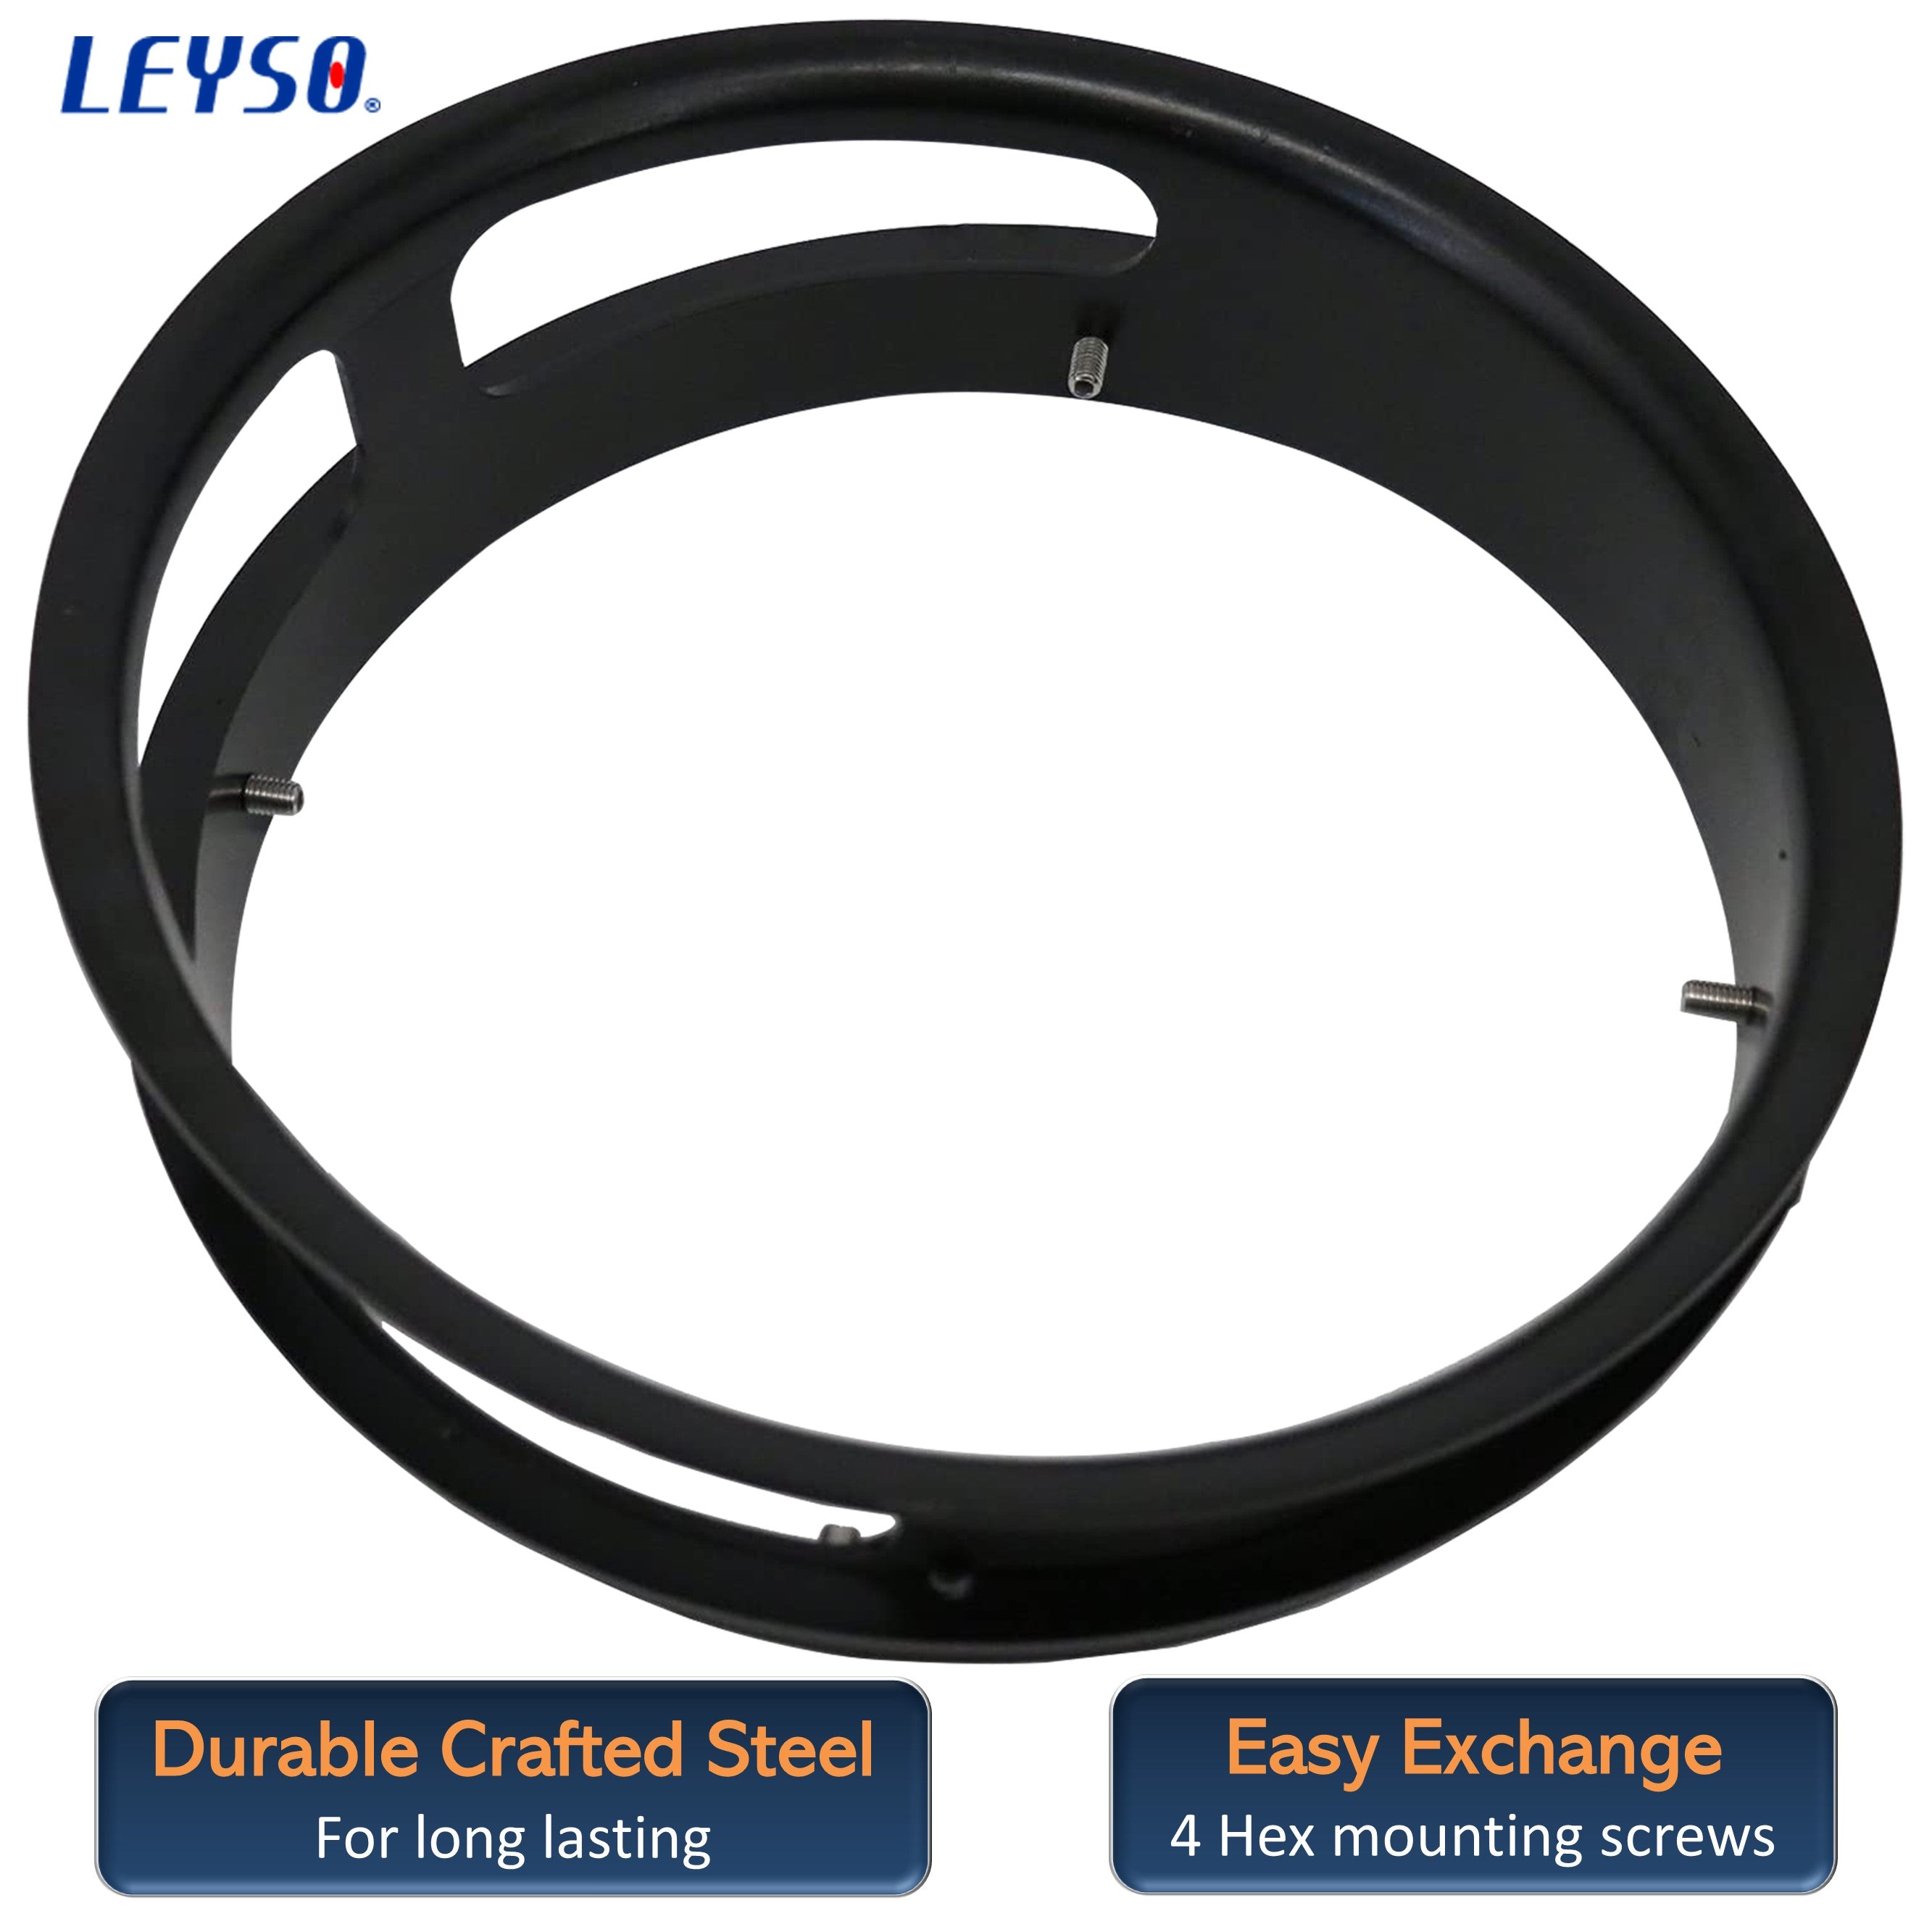 Leyso 13” Diameter 3 Opening Steel Rim to Replace the Worn Out Wok Ring for Chinese Wok Range